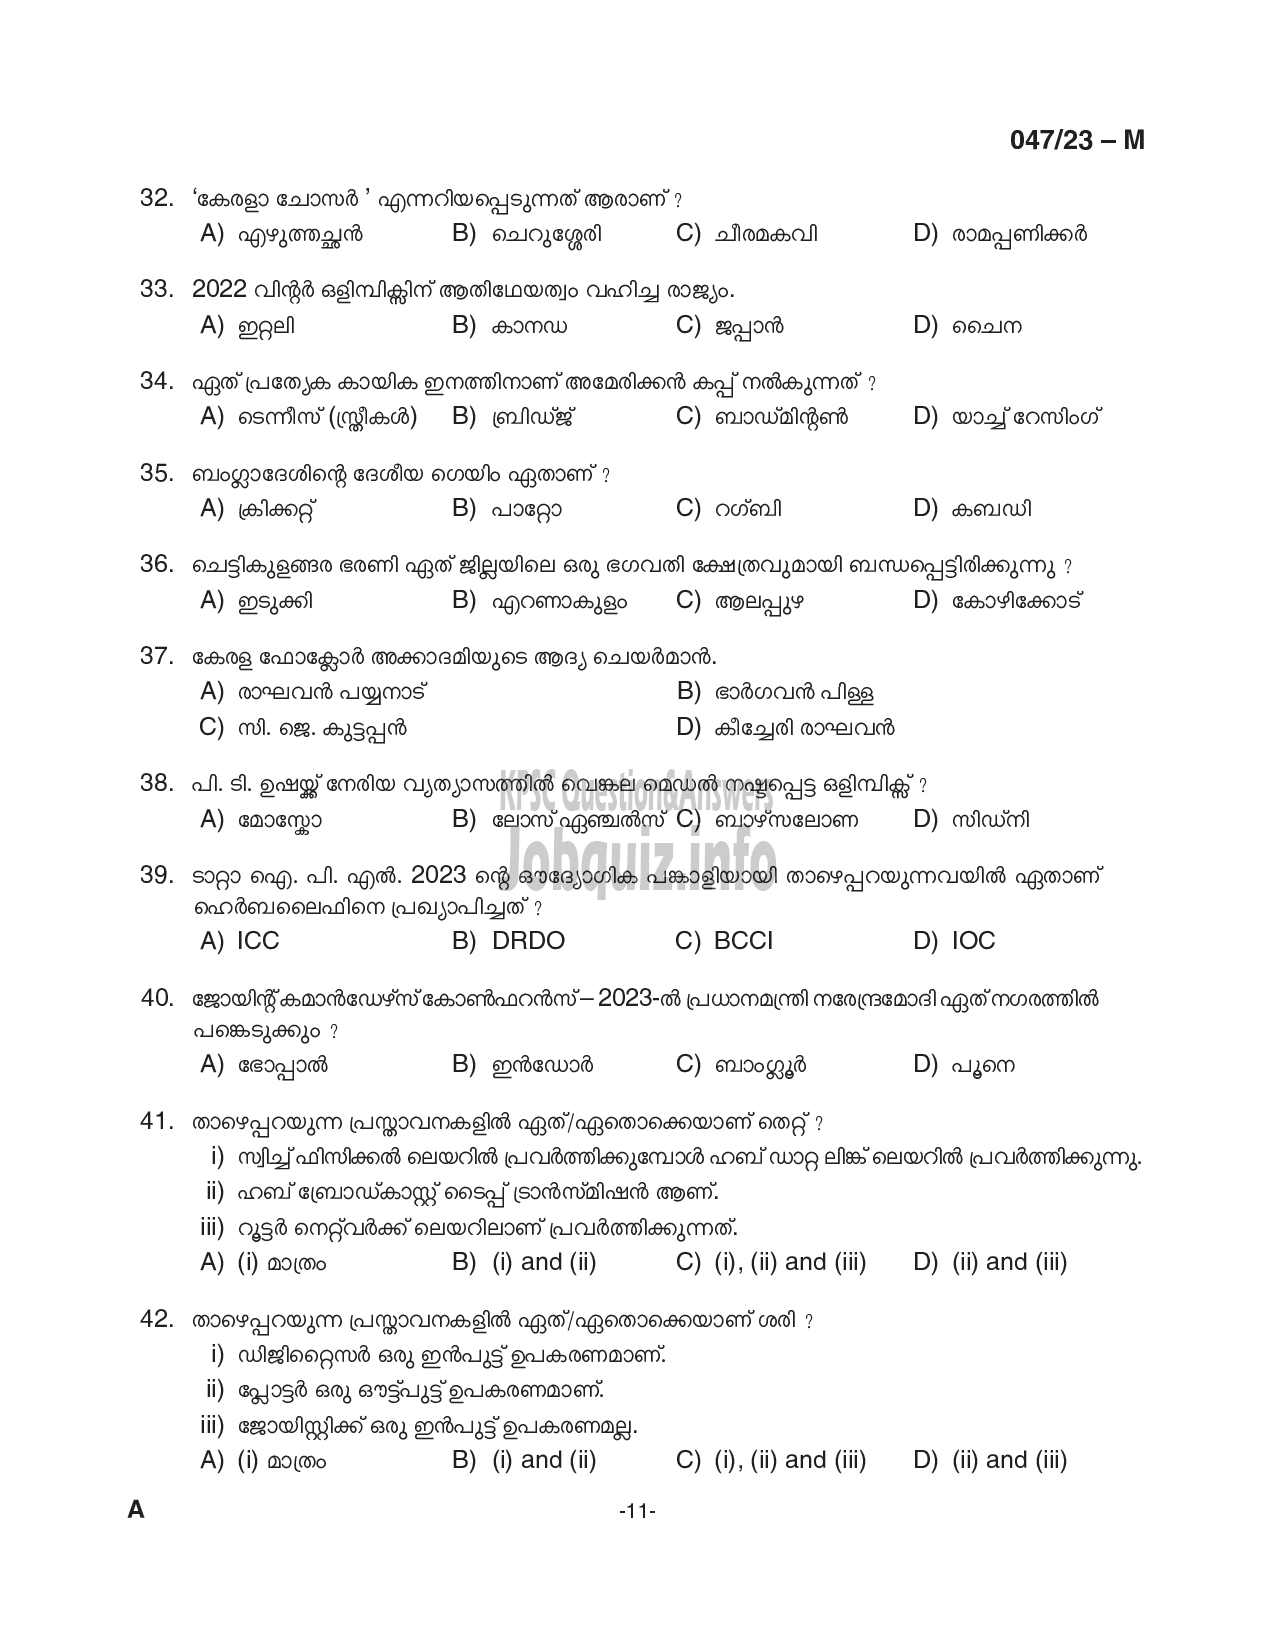 Kerala PSC Question Paper - Field Officer in KFDC Ltd, Assistant in Universities, Sub Inspector of Police (Trainee) in Police (Common Preliminary Examination Stage III)-11